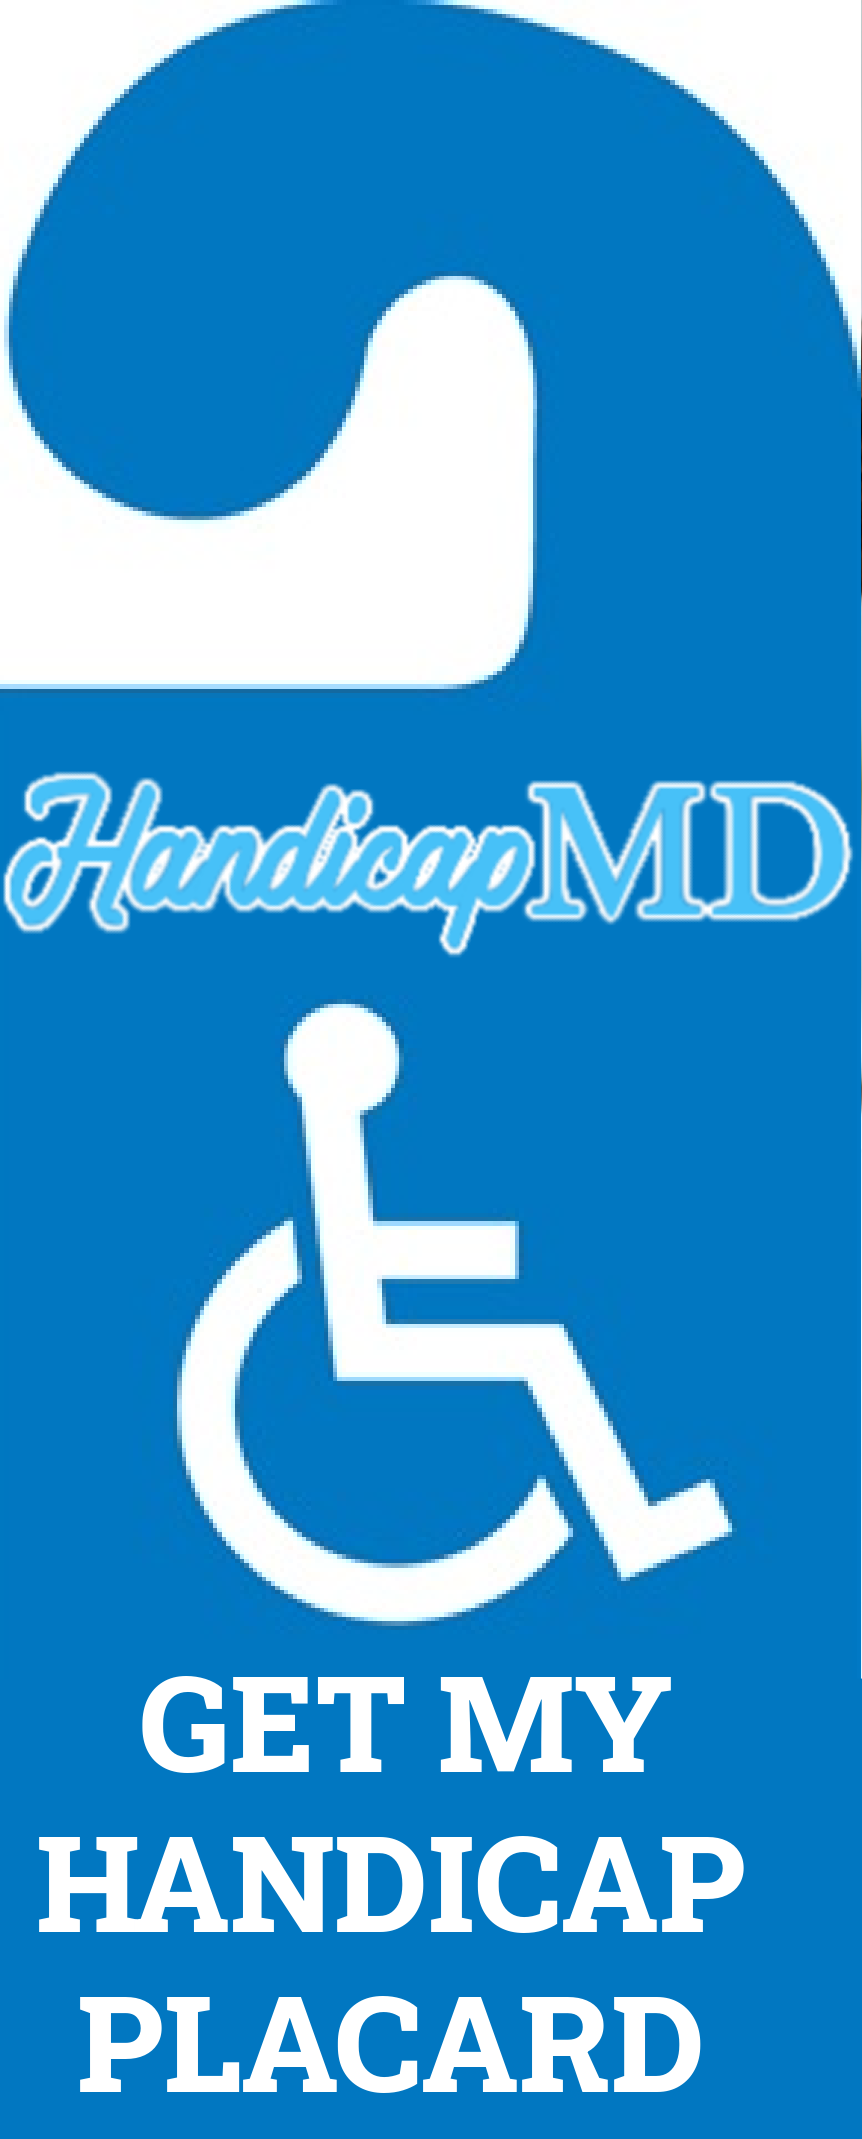 Online Guide to Handicap Parking in New Hampshire